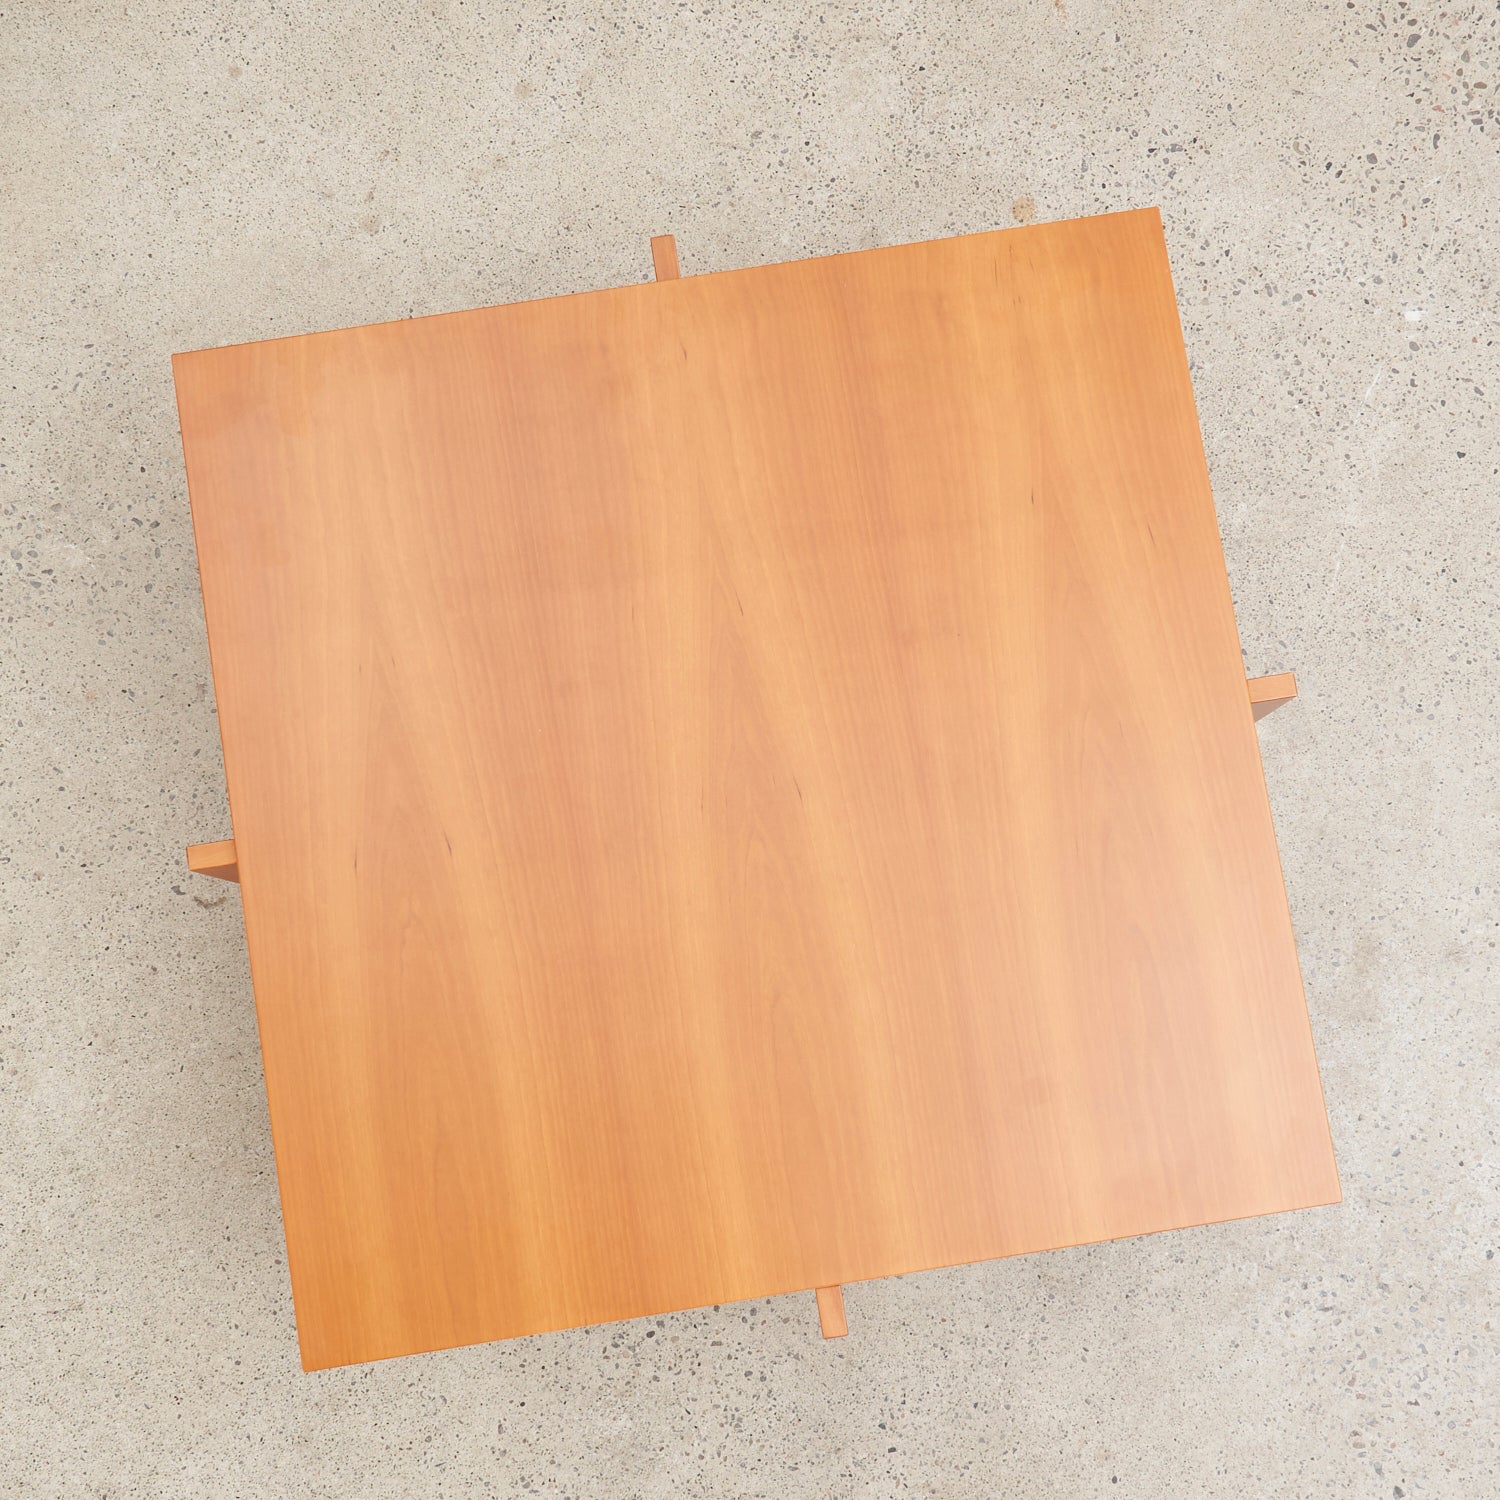 'Lewis' Coffee Table in Cherry Wood by Frank Lloyd Wright for Cassina